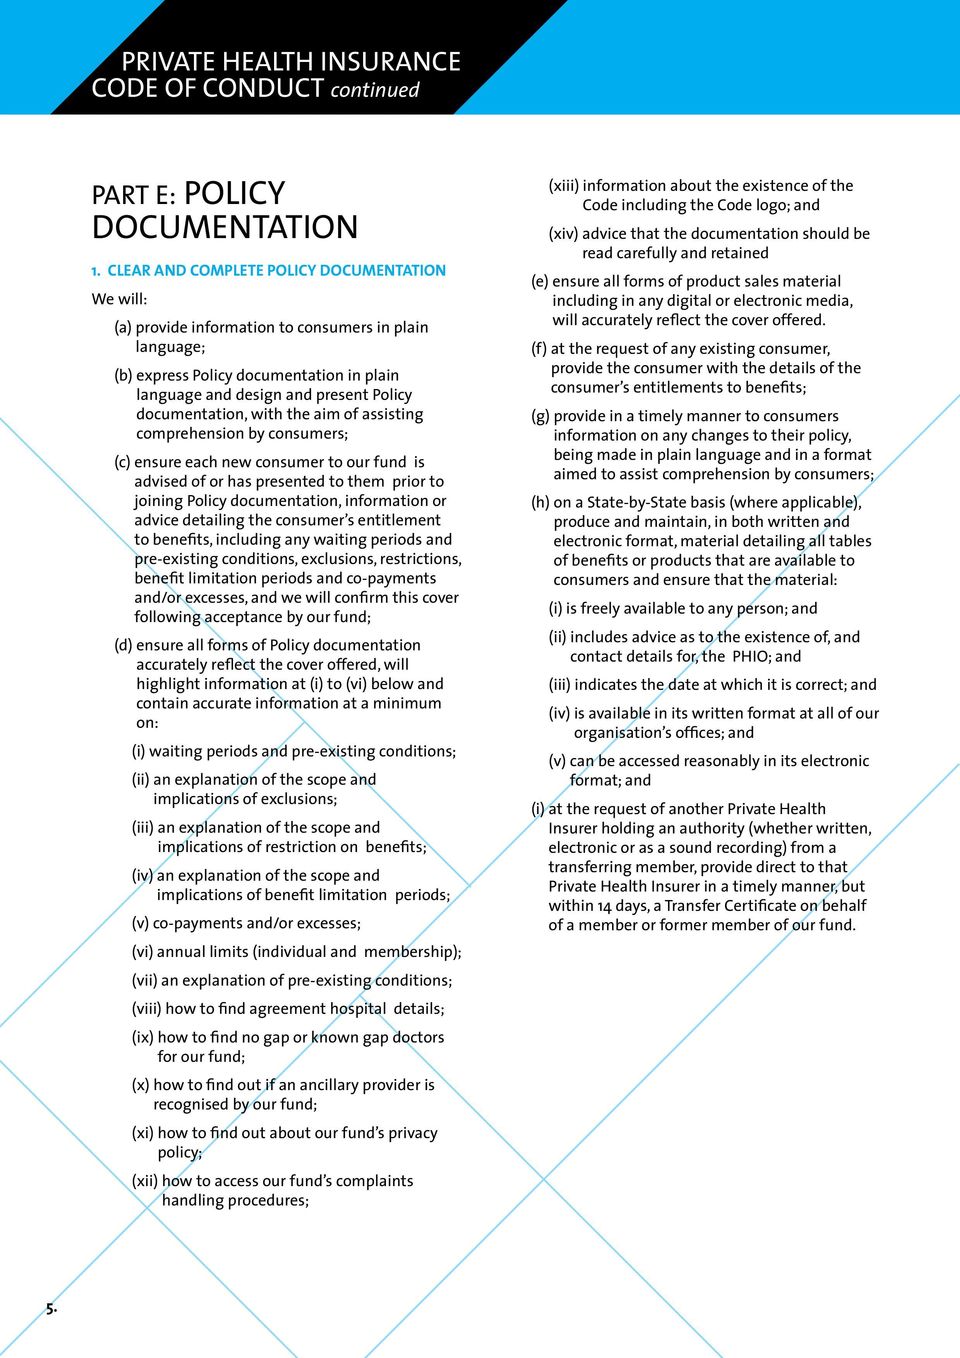 documentation, with the aim of assisting comprehension by consumers; (c) ensure each new consumer to our fund is advised of or has presented to them prior to joining Policy documentation, information